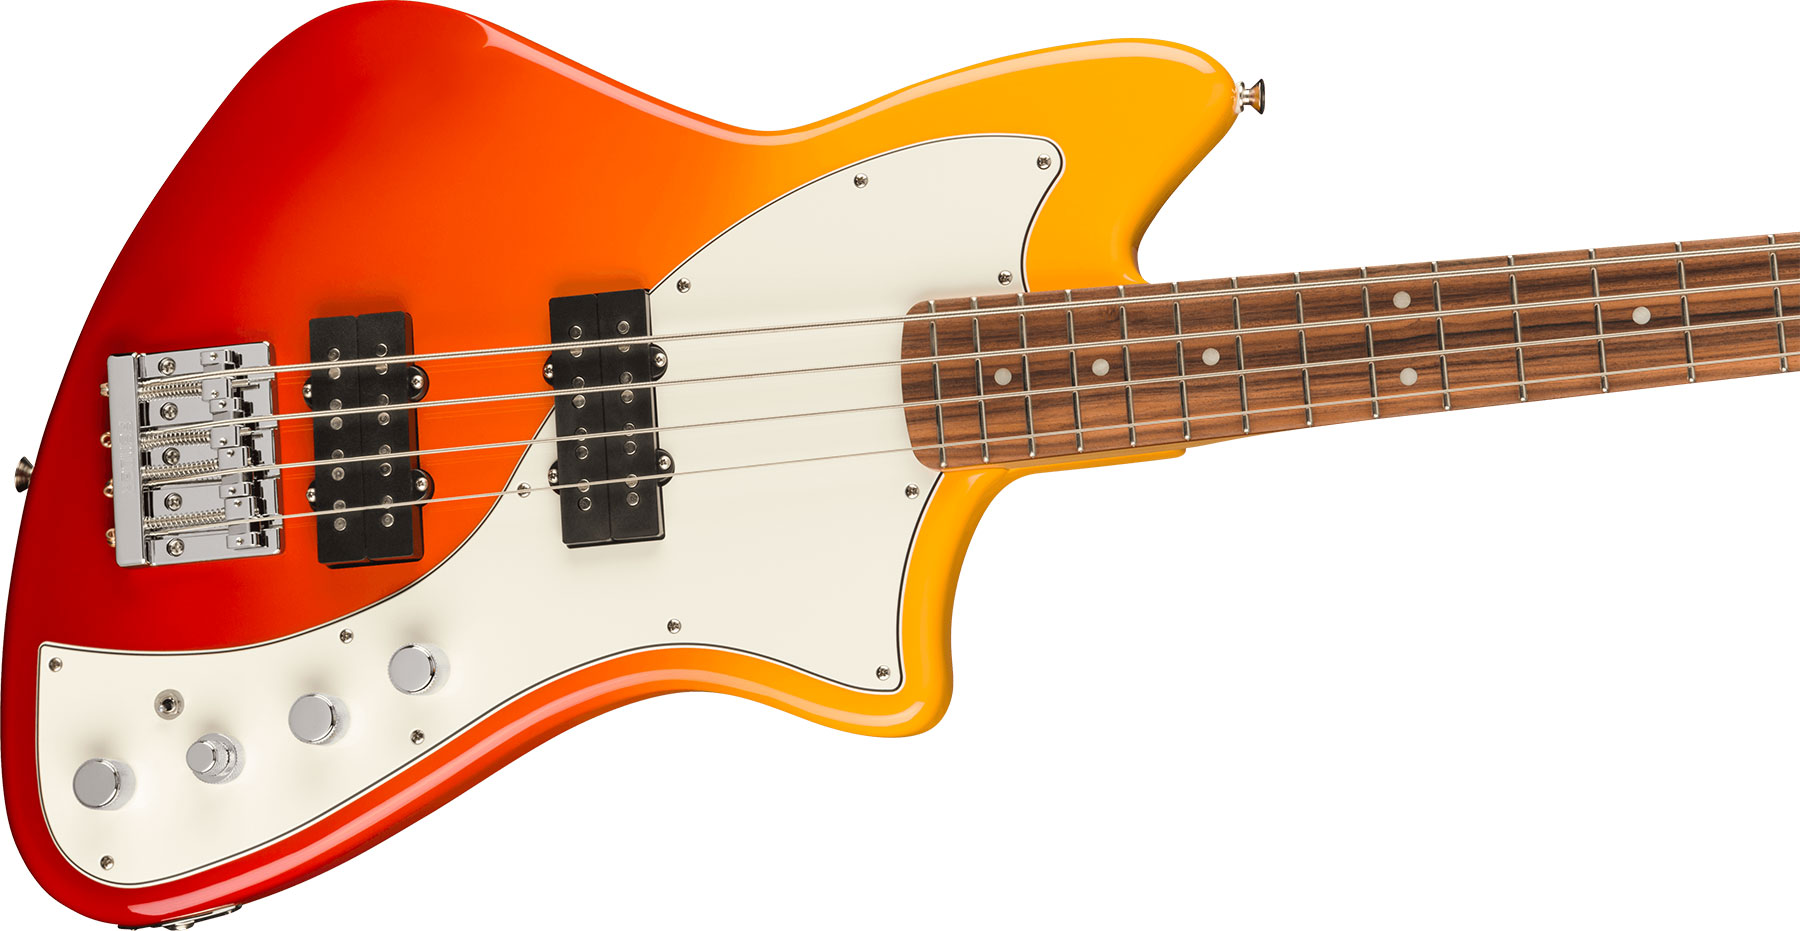 Fender Meteora Bass Active Player Plus Mex Pf - Tequila Sunrise - Solid body electric bass - Variation 2